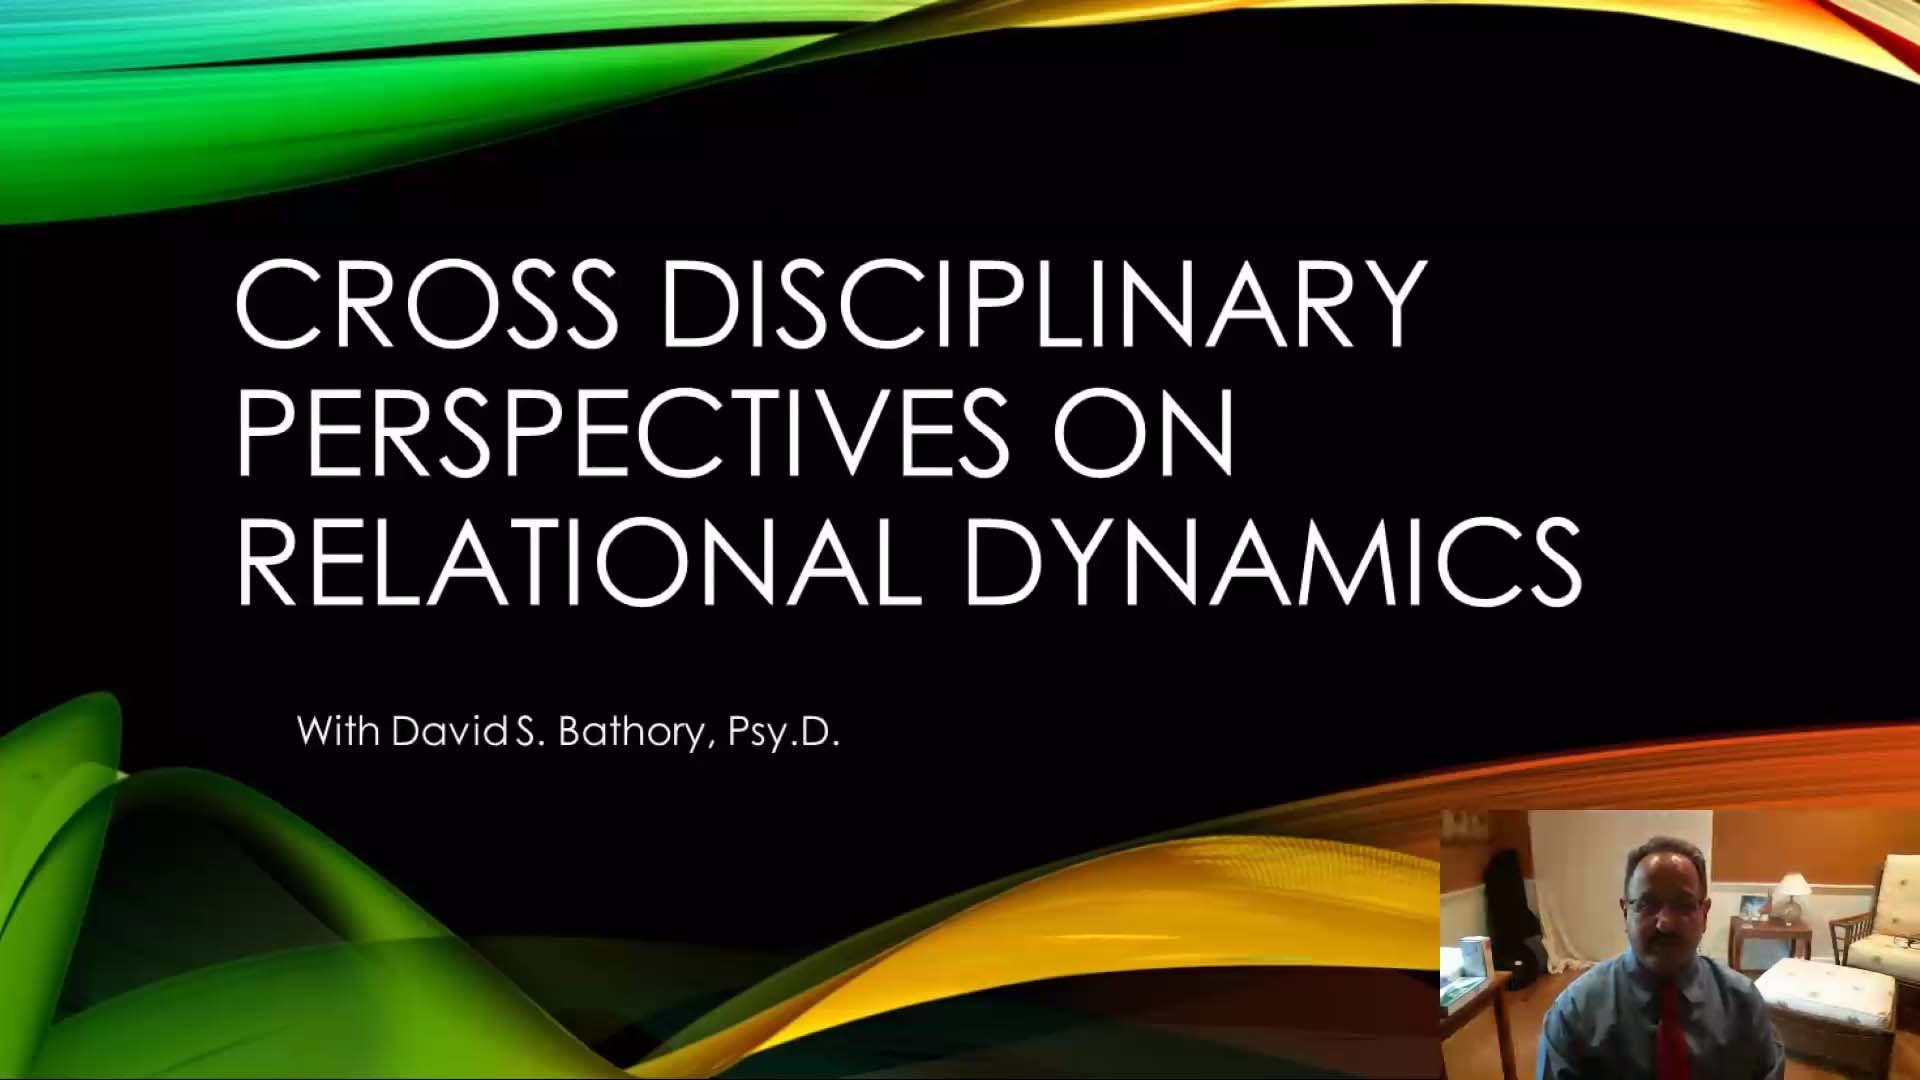 Groundbreaking Research and Cross-Disciplinary Perspectives on Relational Dynamics